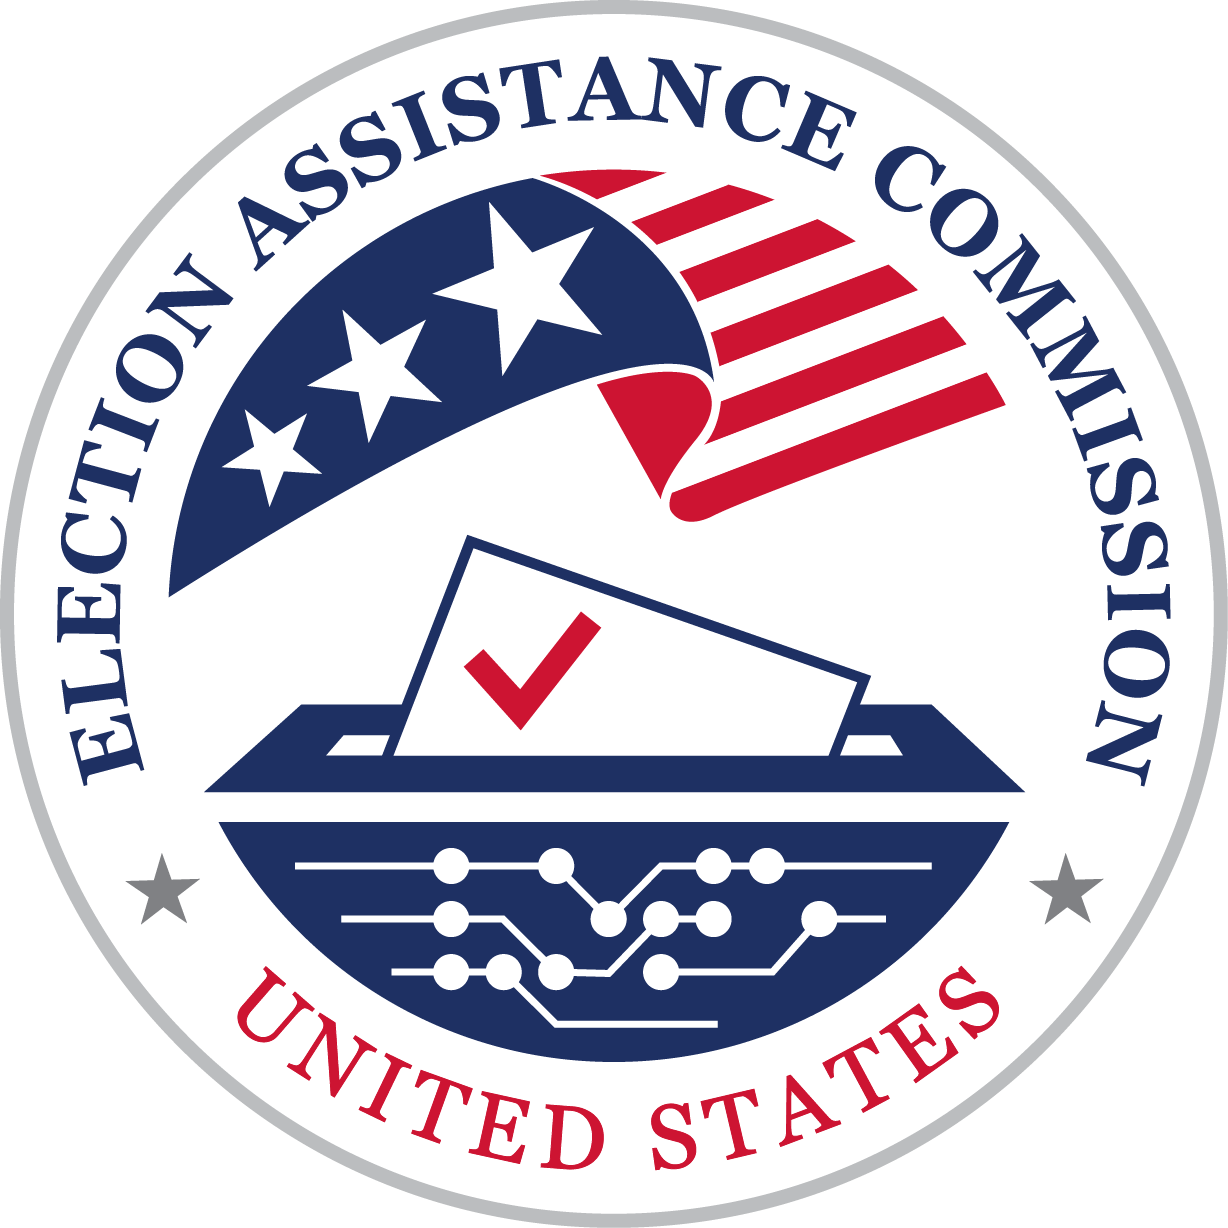 Image of US Election Assistance Commission logo